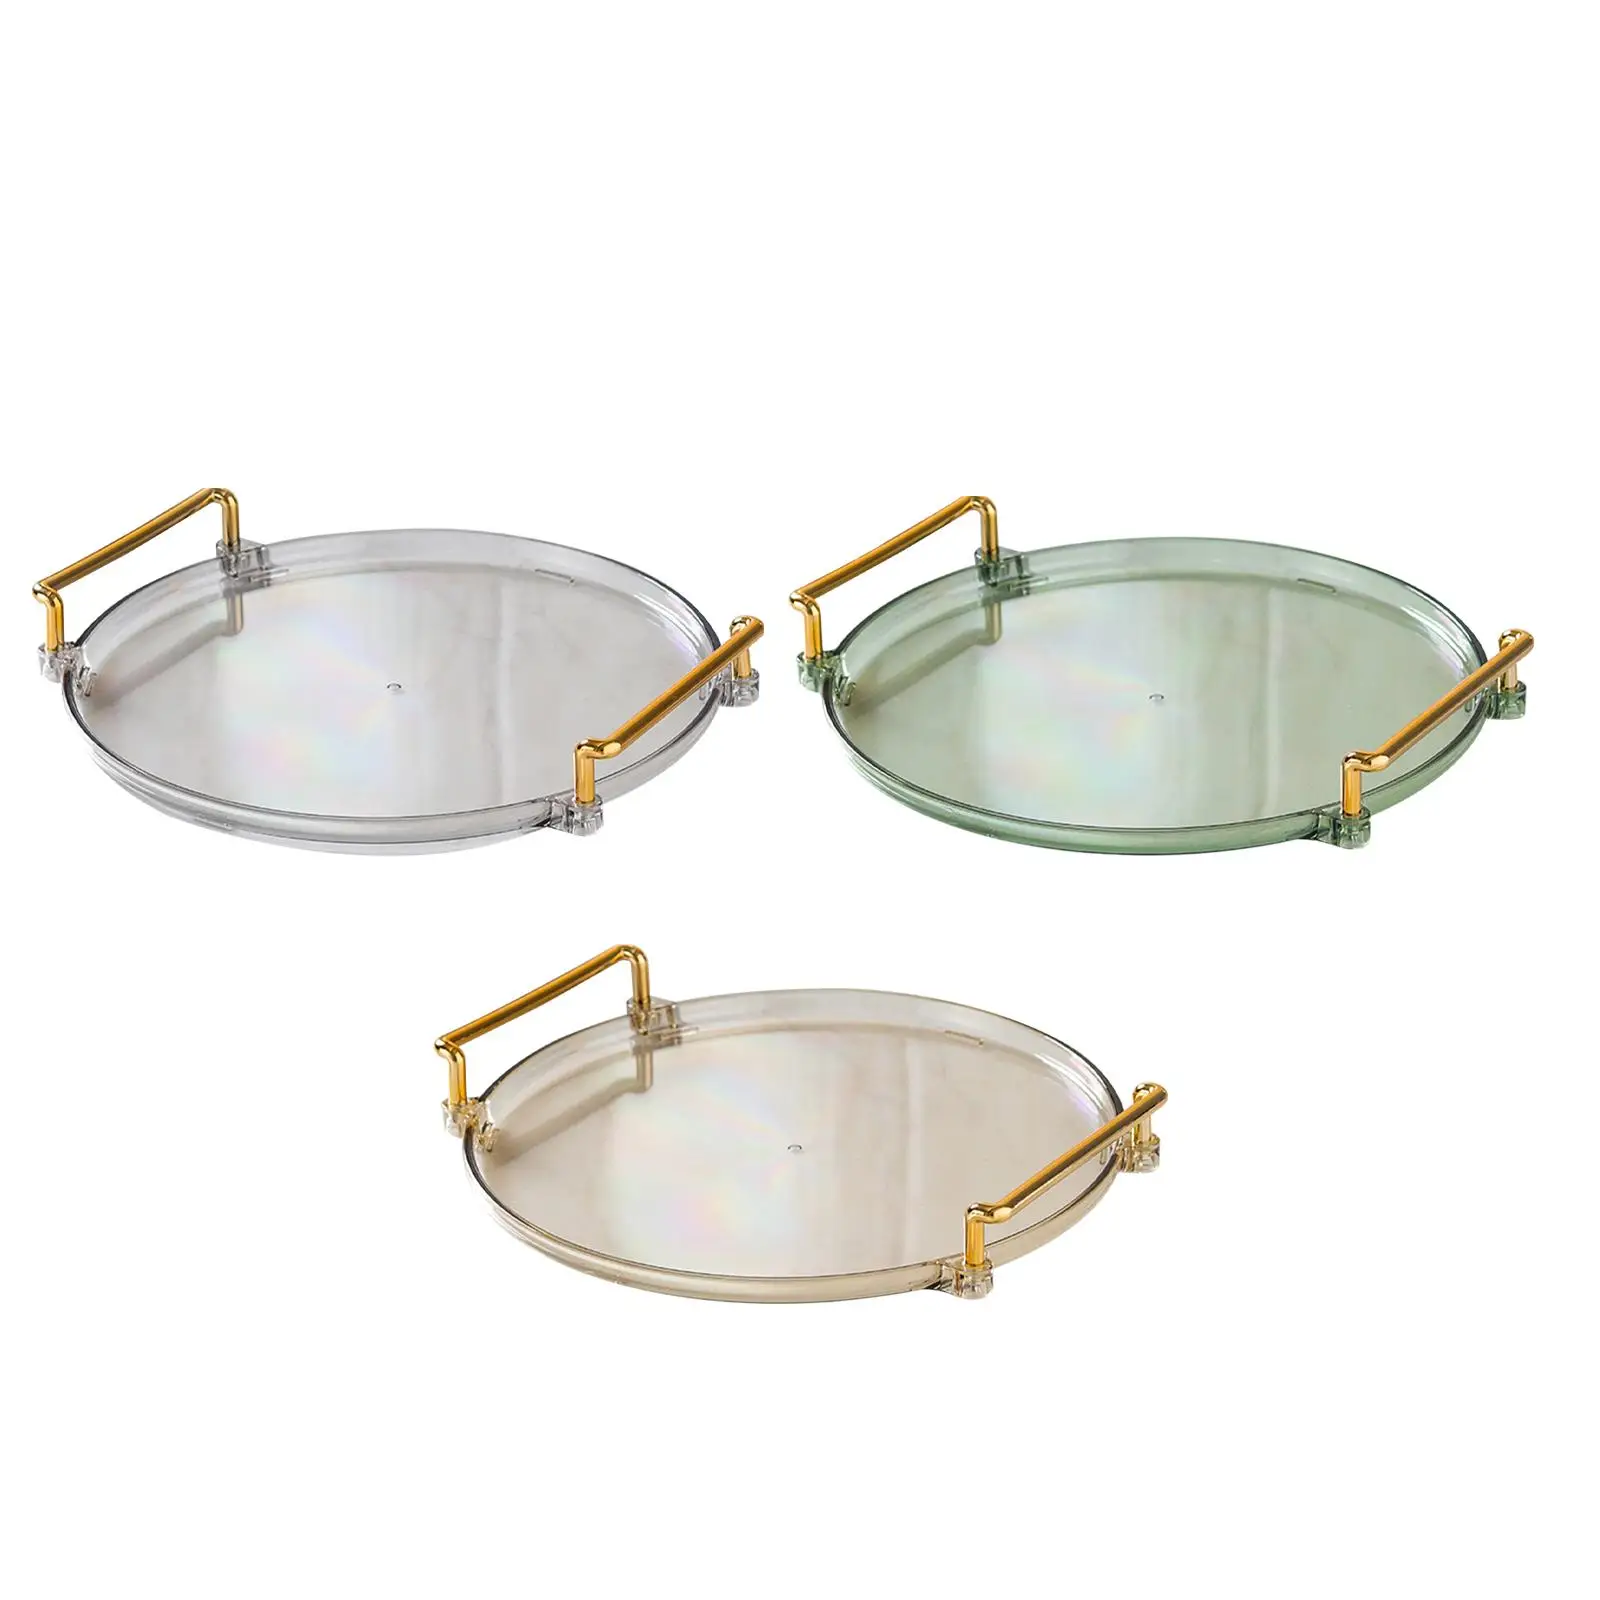 Plastic Serving Tray with Handles Round Platters Food Tray Vanity Tray for Toilet Dressing Room Home Dresser Table Organizer